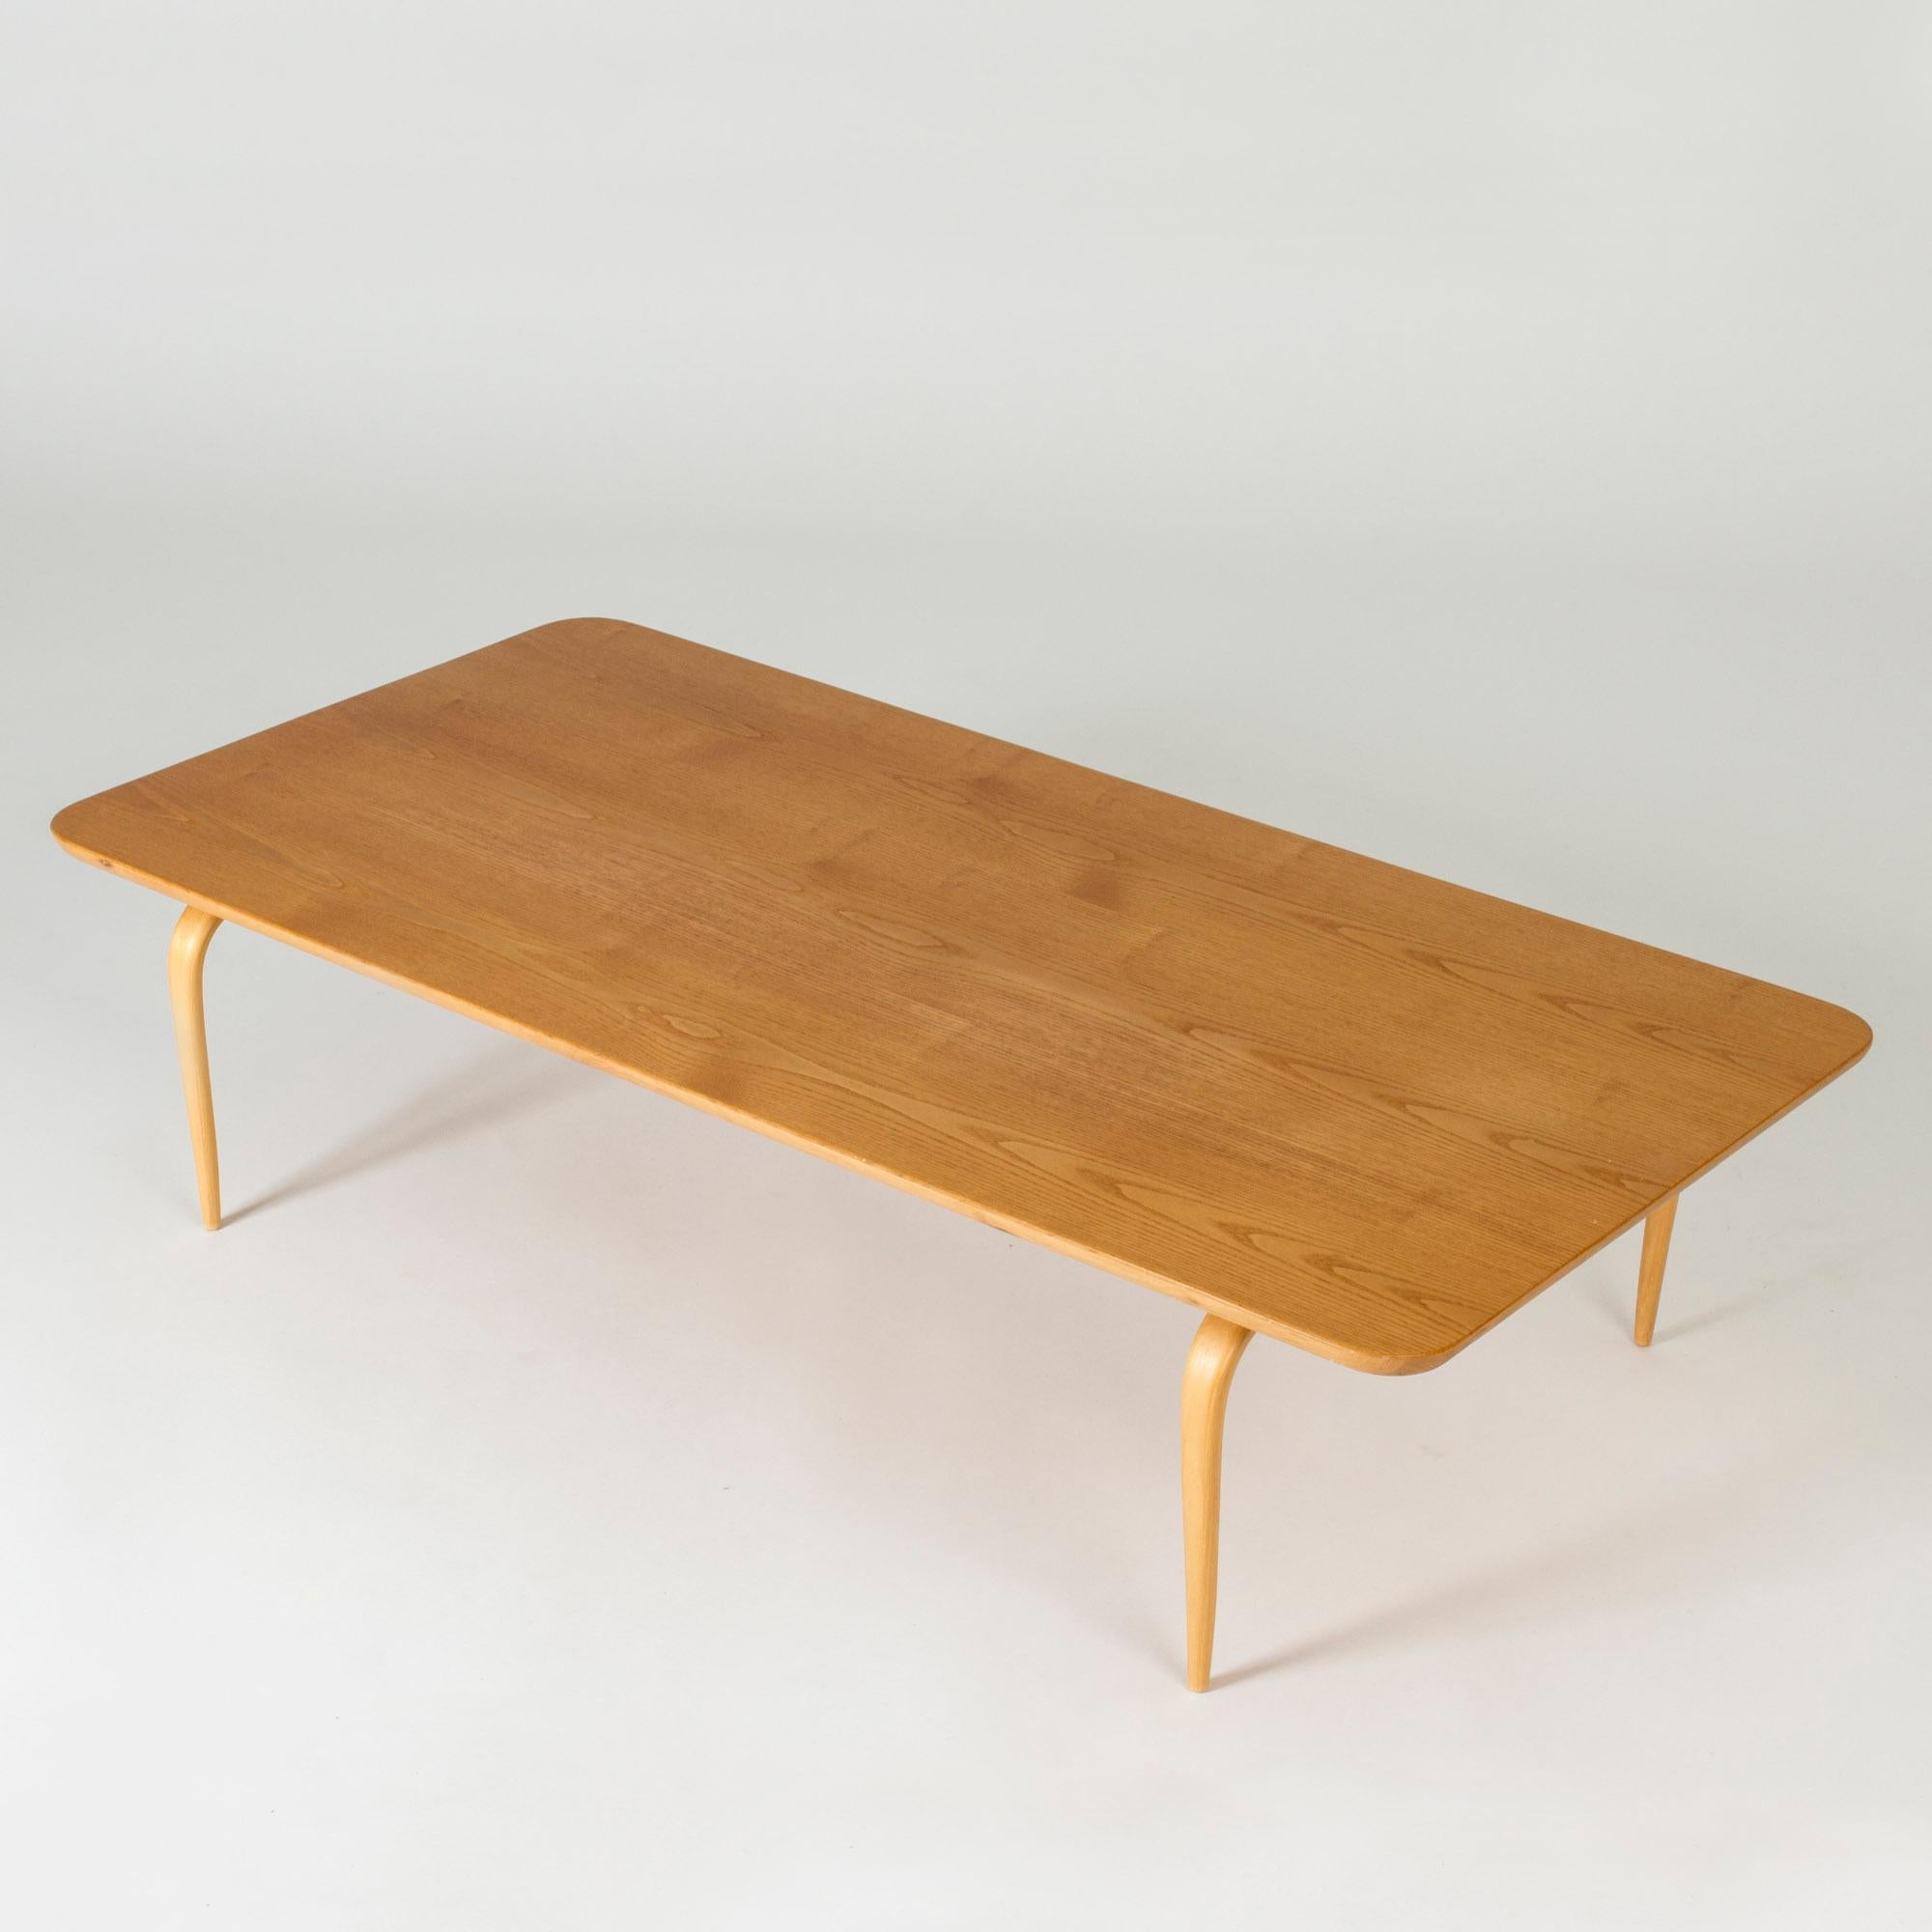 Coffee table by Bruno Mathsson, made from birch. Very low design, with elegantly rounded corners and curved legs.